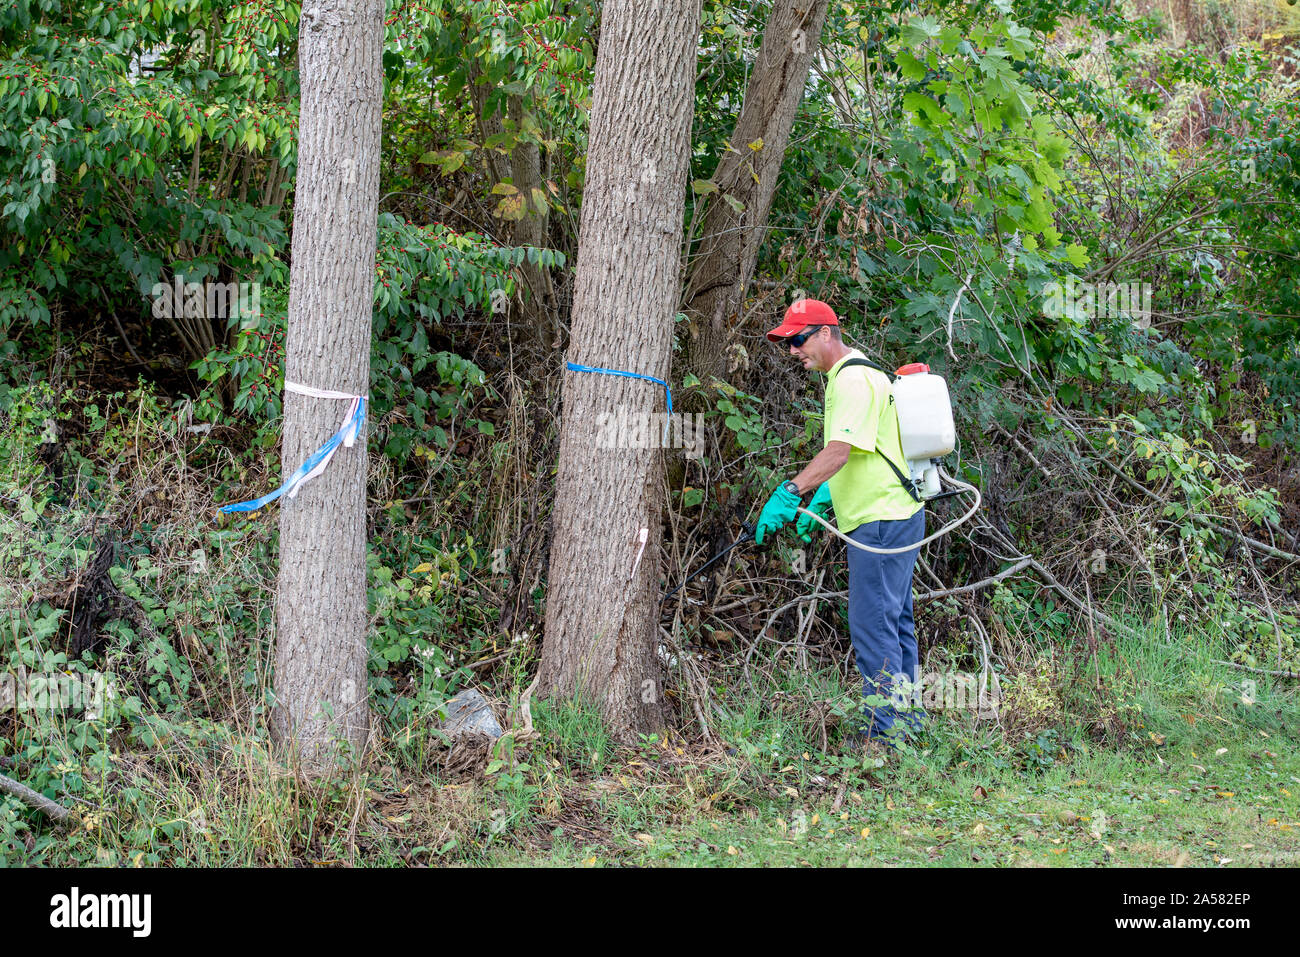 ARBORIST SPRAYING SYSTEMIC INSECTICIDE DINOTEFURAN BARK SPRAY TREATMENT TO TRUNK OF A BLACK WALNUT TREE TO PROTECT FROM SPOTTED LANTERNFLY INFESTATION Stock Photo